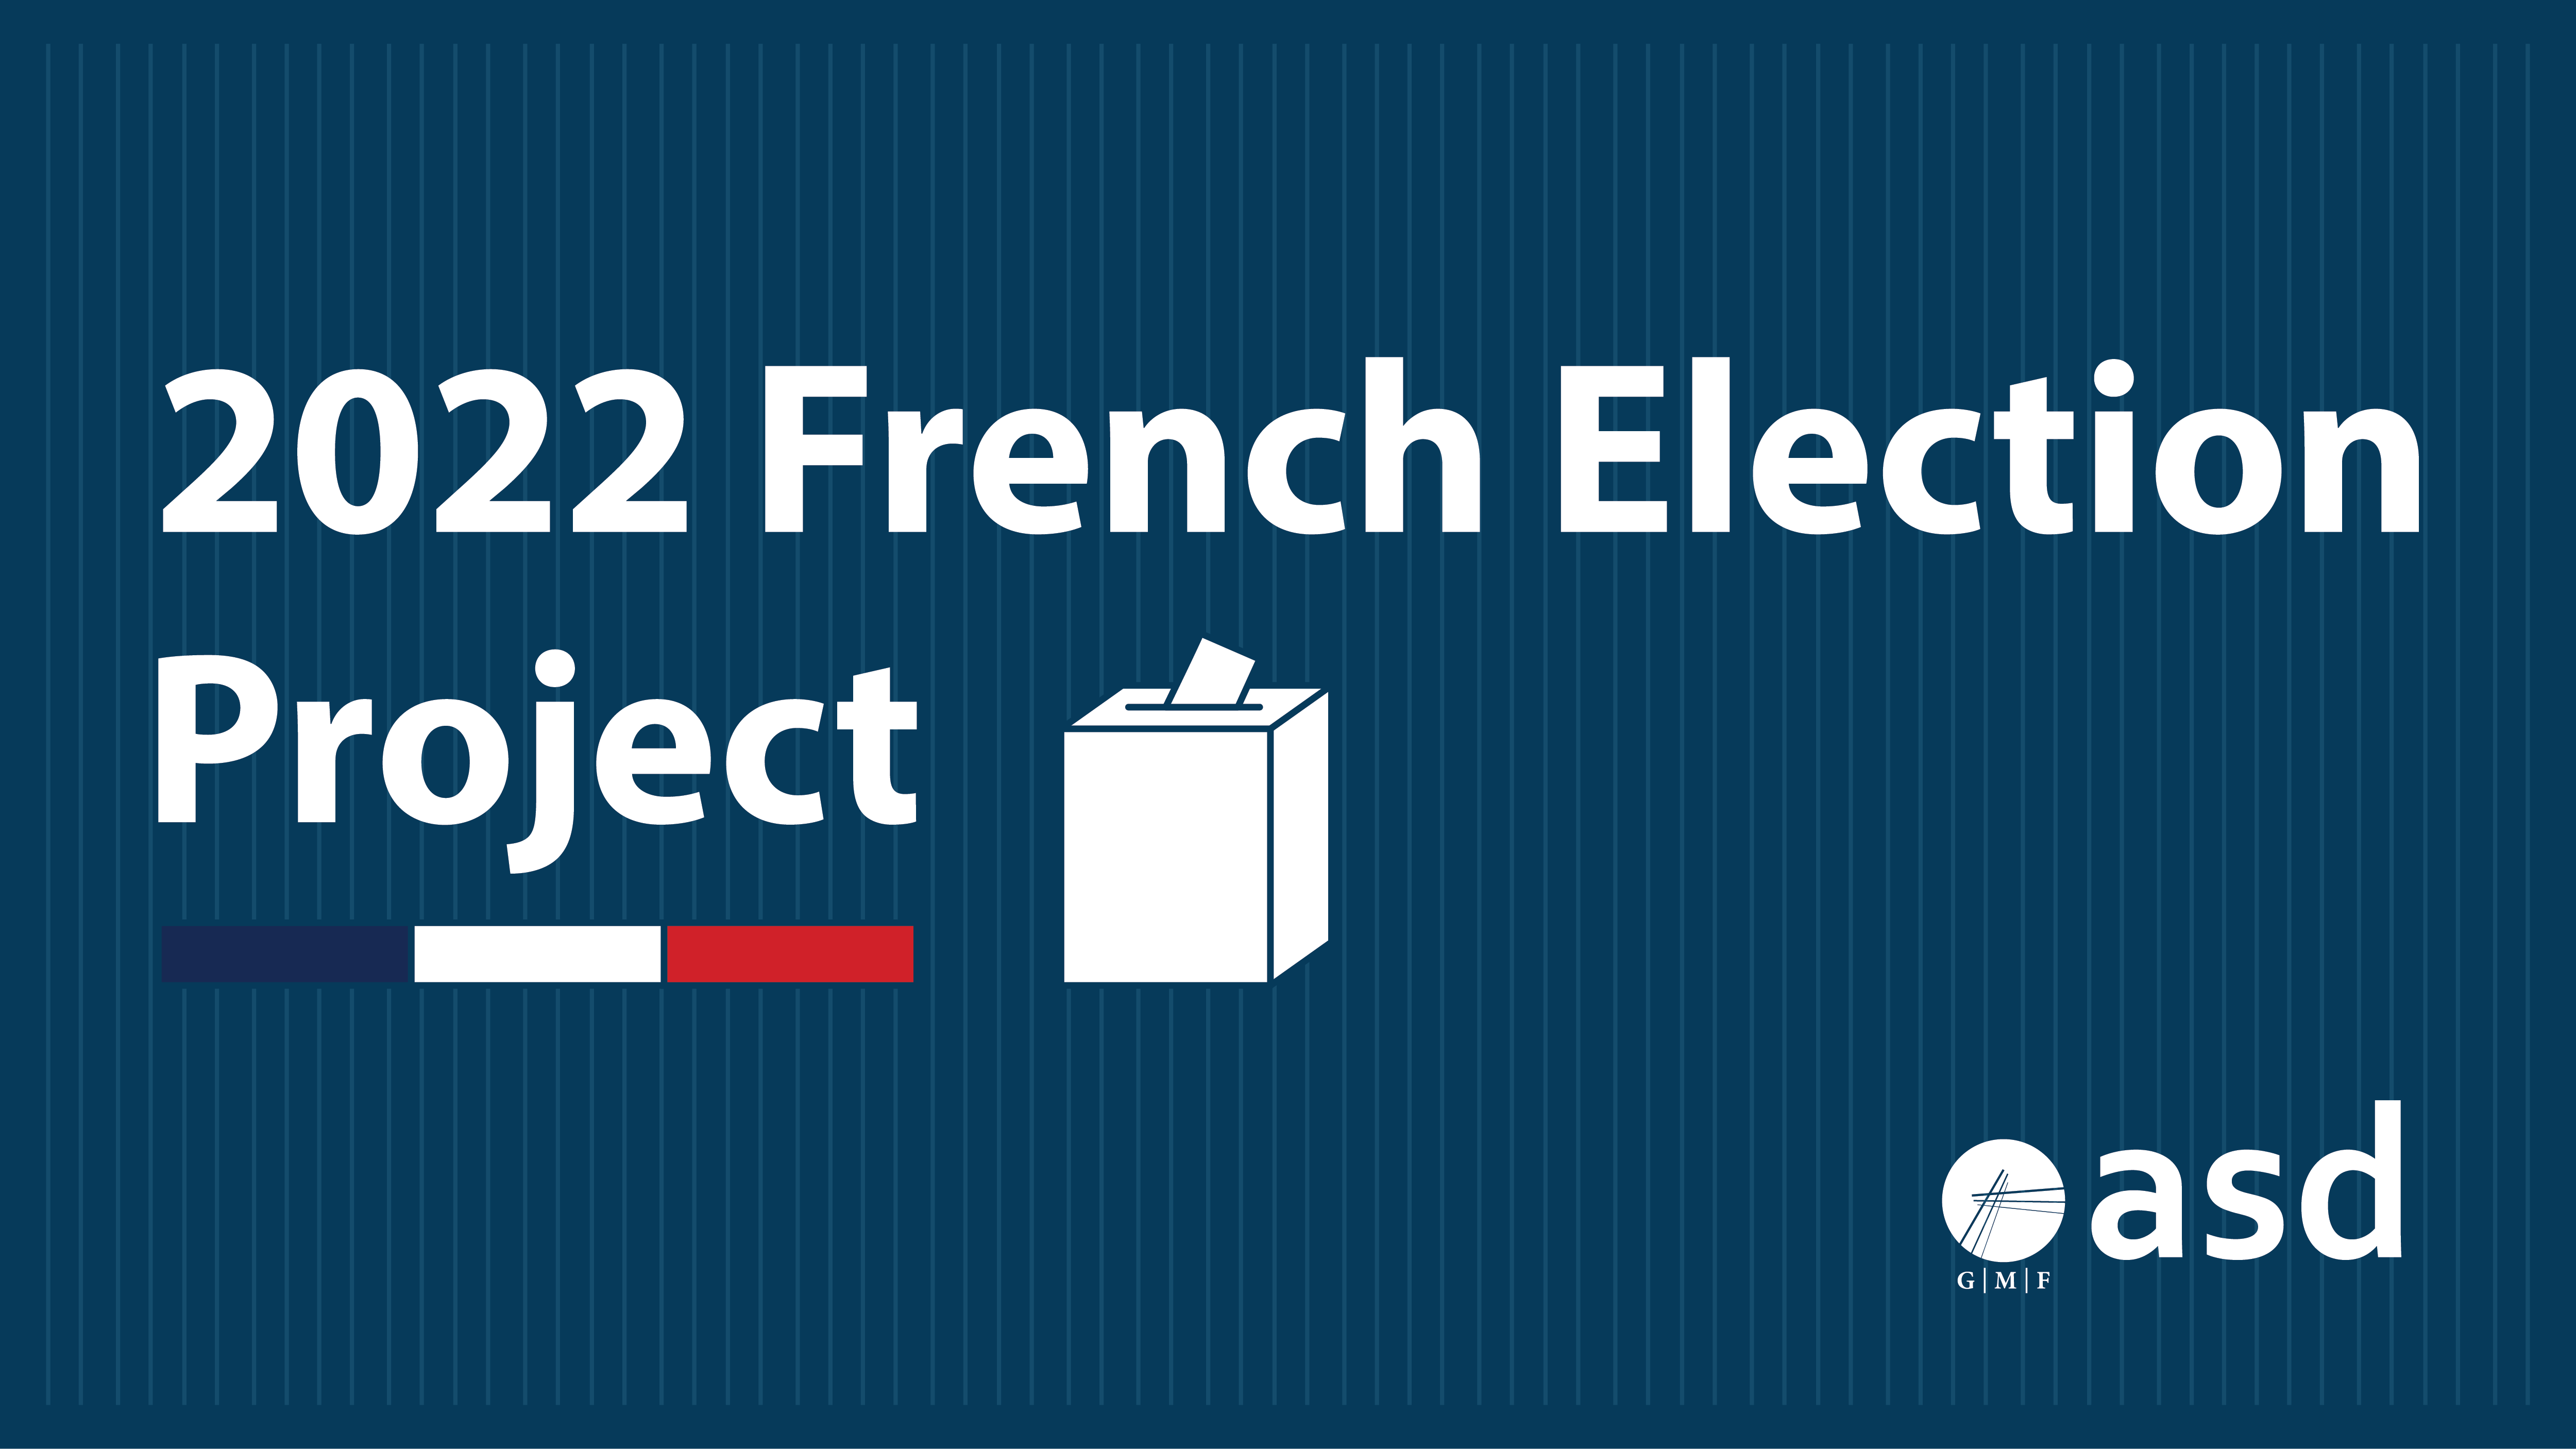 2022 French Election Project Alliance For Securing Democracy